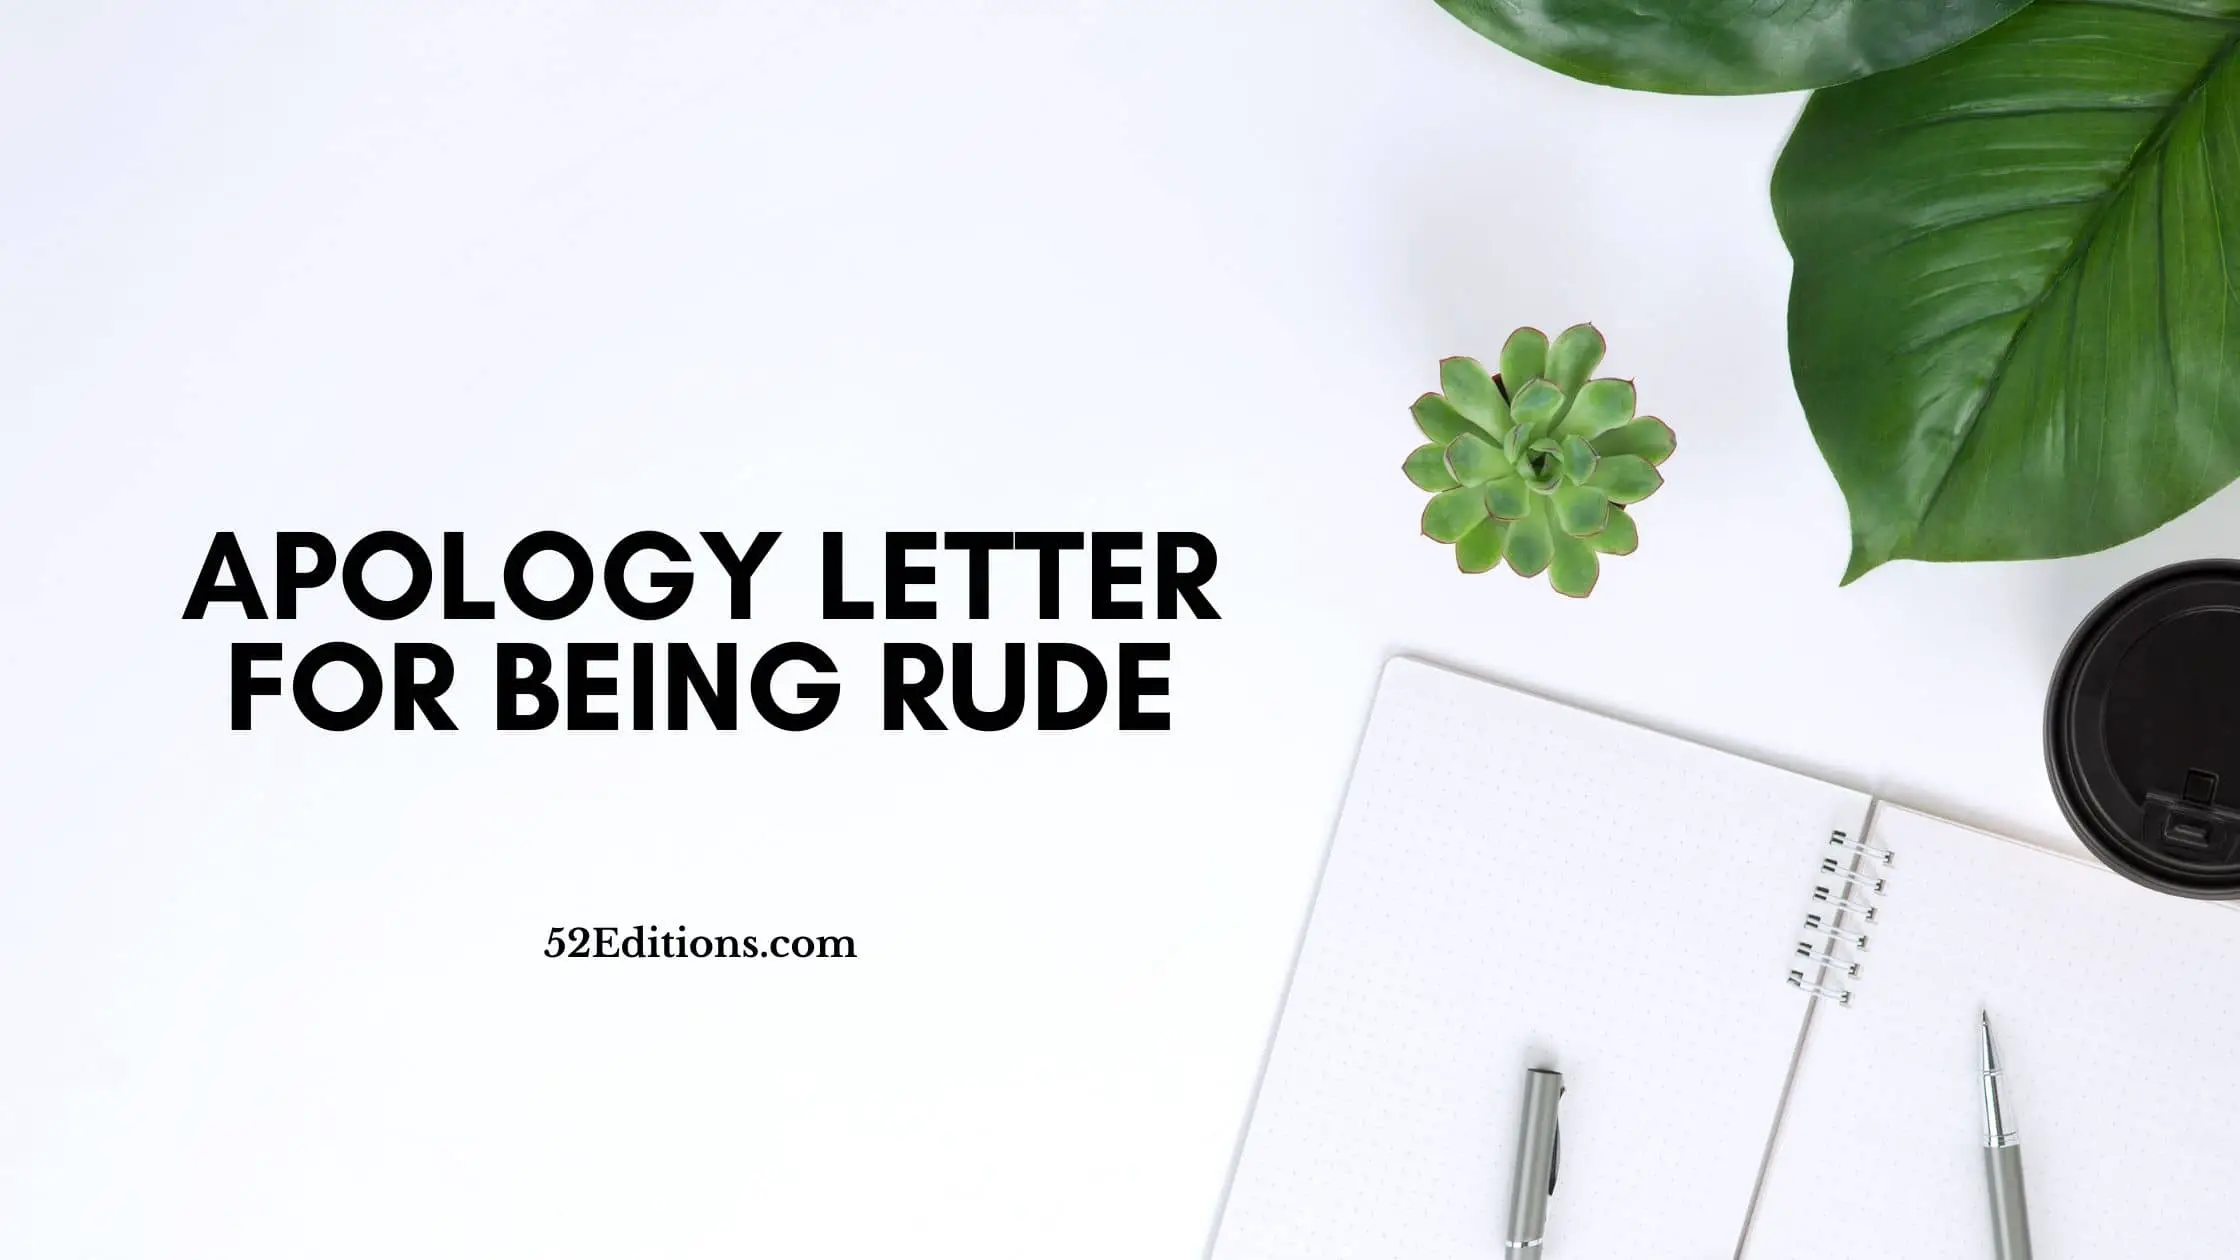 An things apology say letter to in Apology Letter: